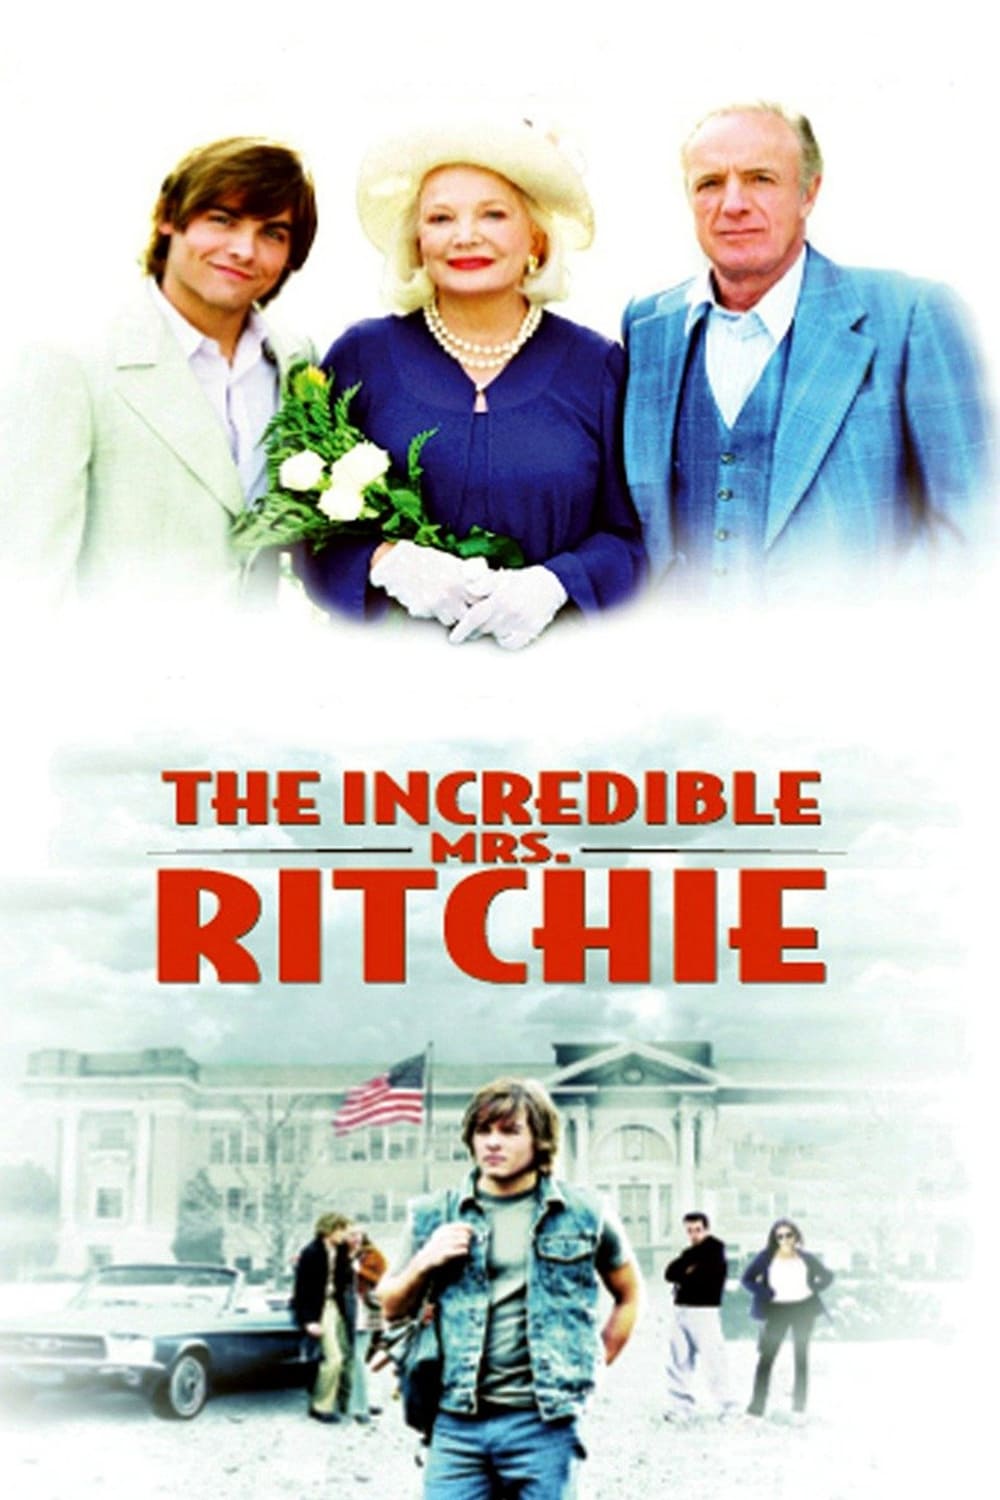 The Incredible Mrs. Ritchie (2004)